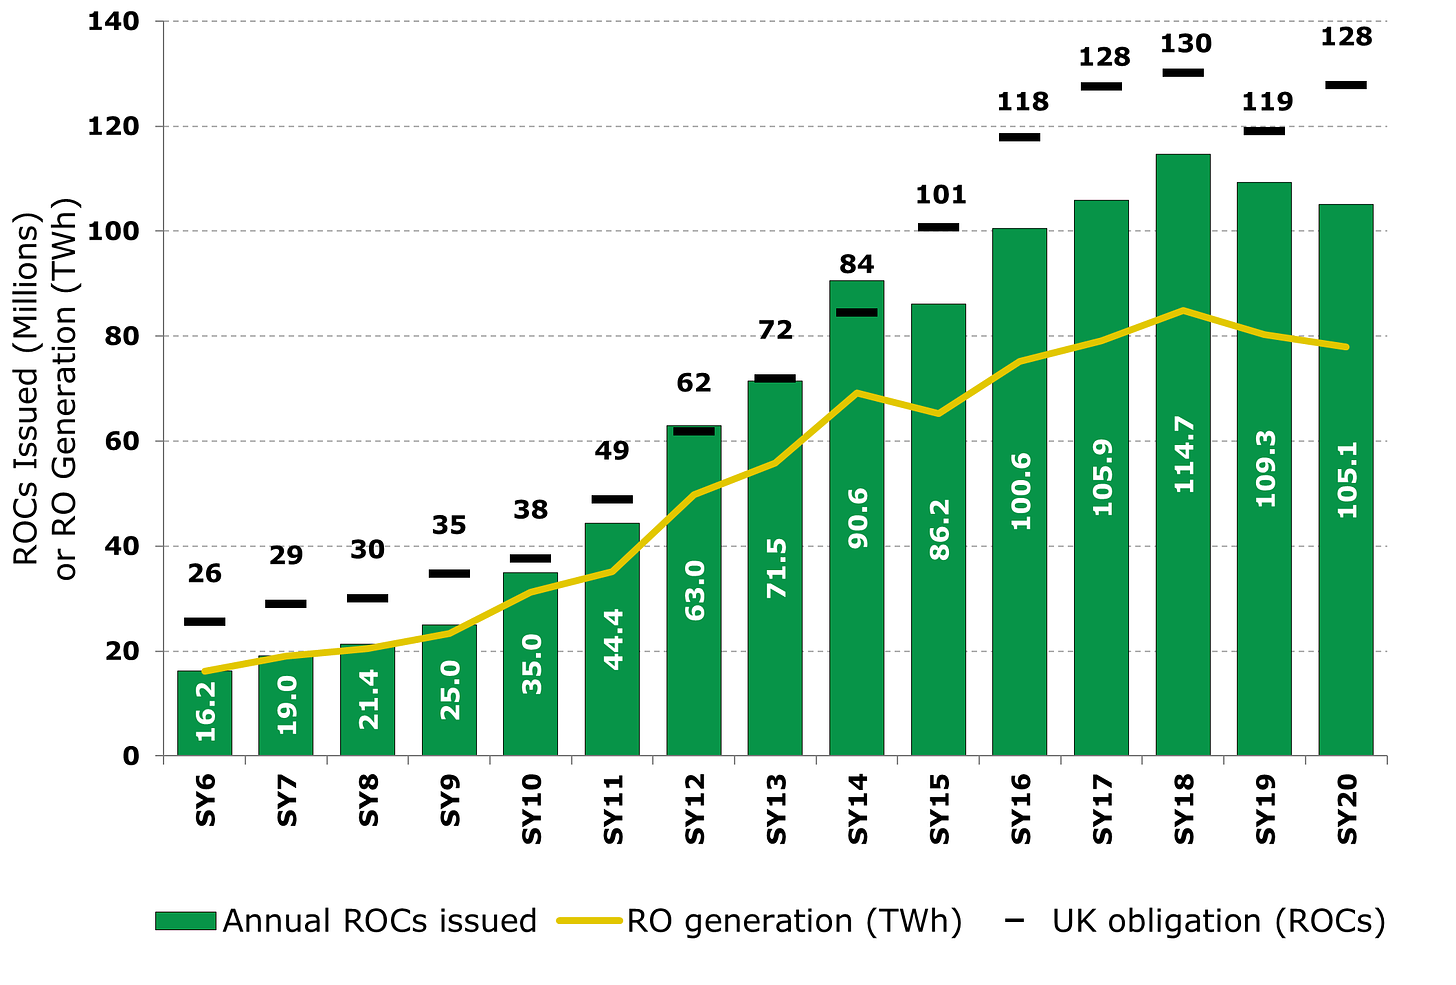 Figure 1 - Annual ROCs Issued (m) and Electricity Generated (TWh) from Ofgem Annual ROC report Figure 3.4